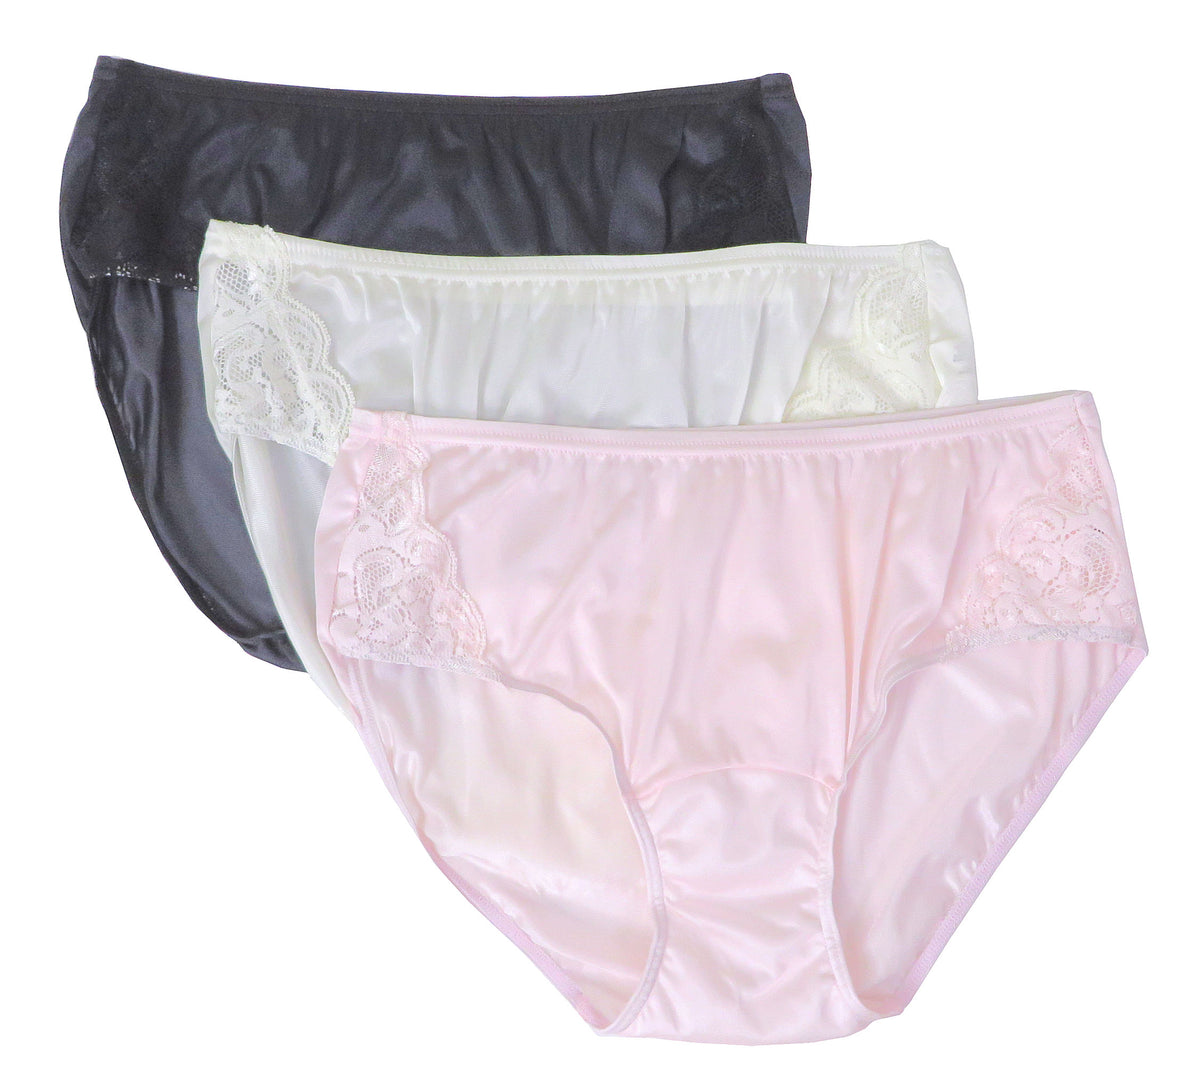 Shadowline Women's Hipster Panty with Lace Underwear Nylon Full